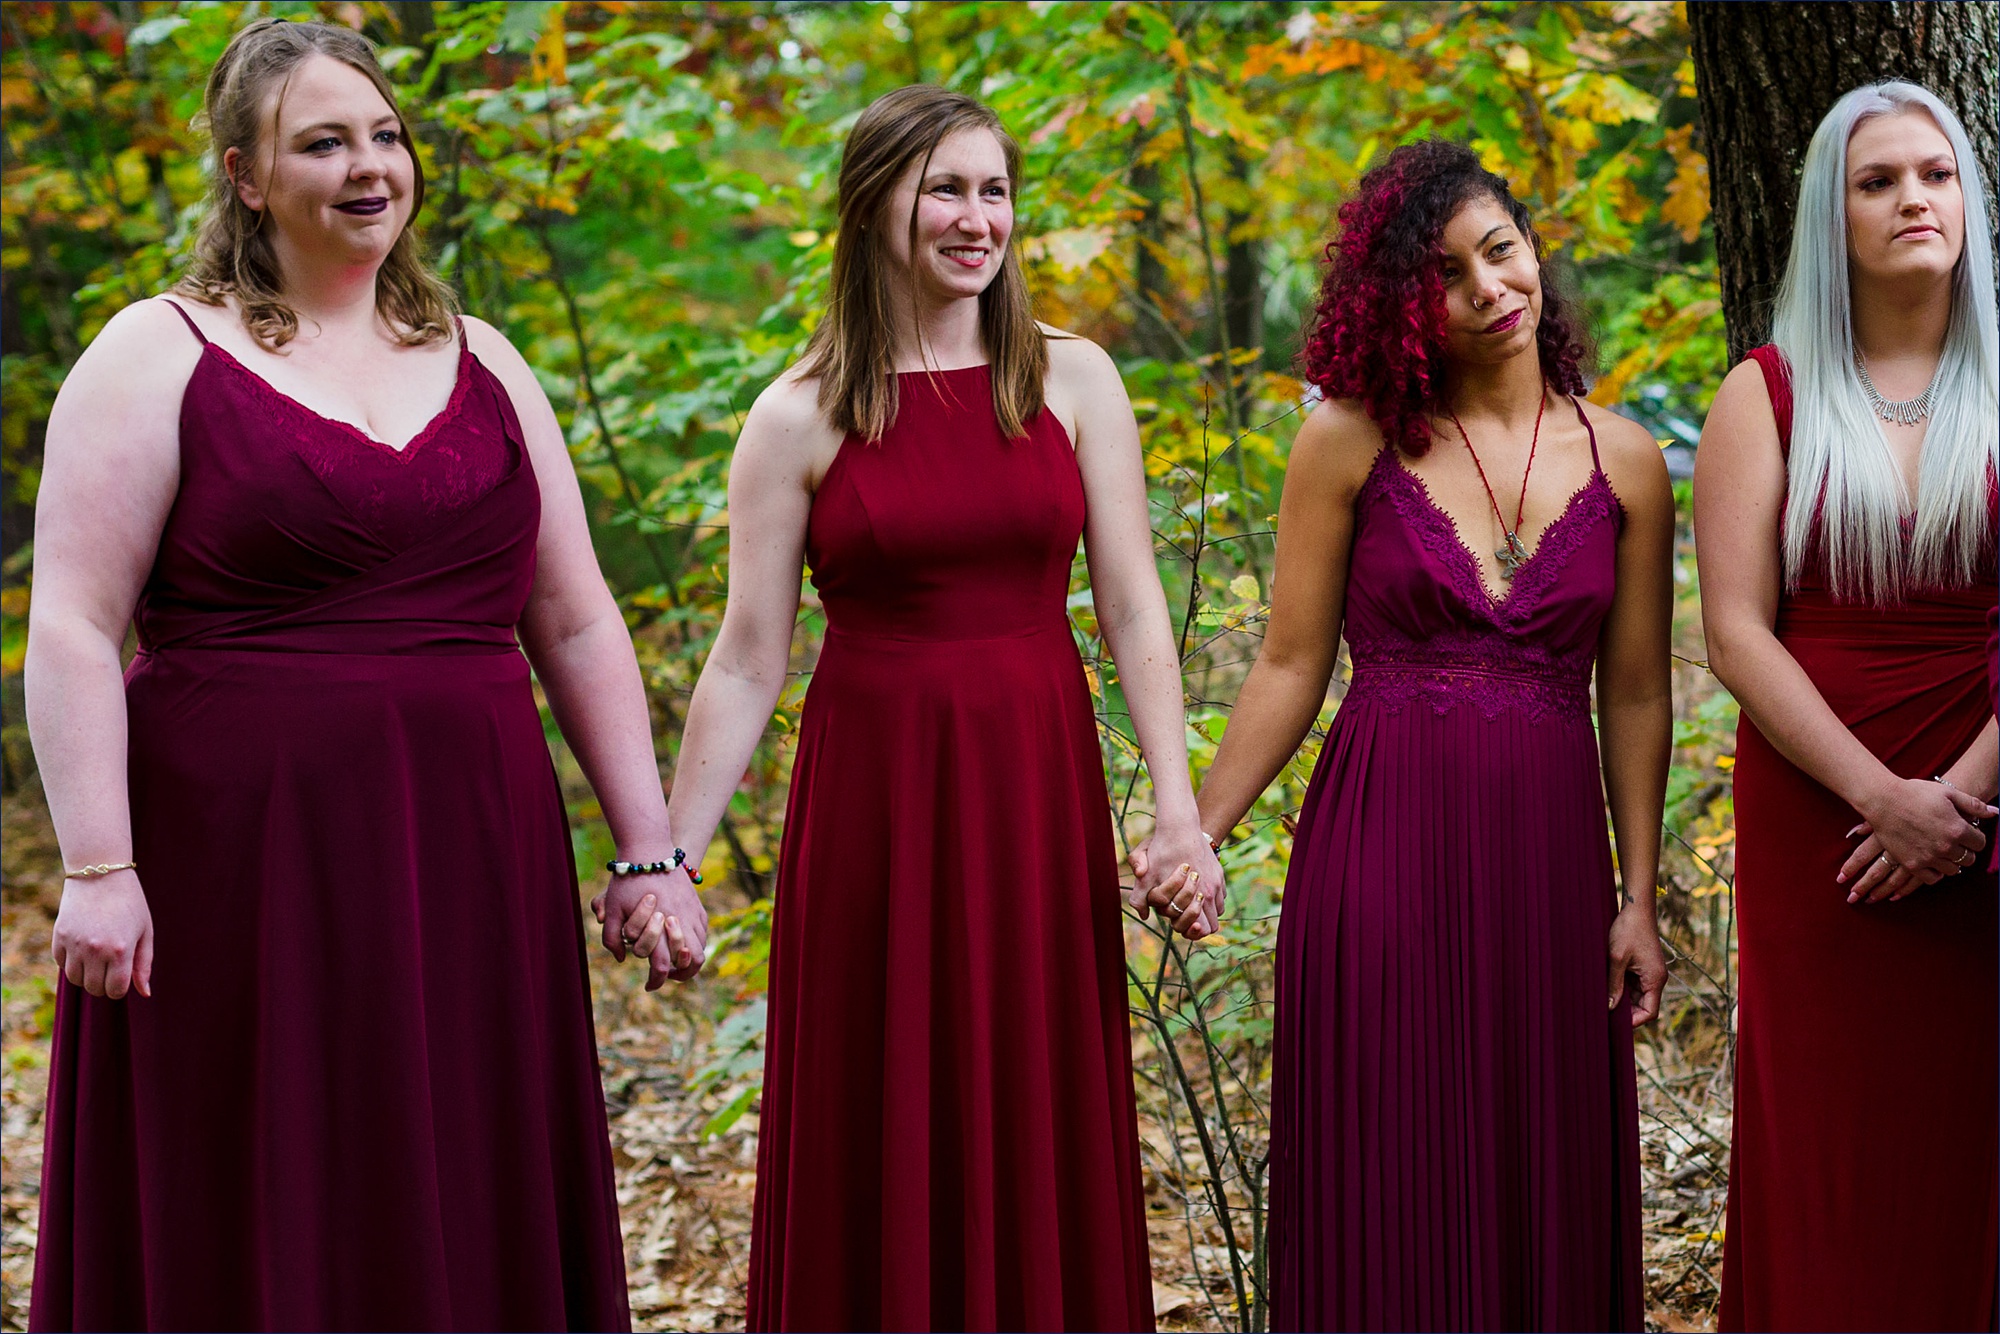 The bridesmaids hold hands as they watch the New Hampshire wedding in the fall take place